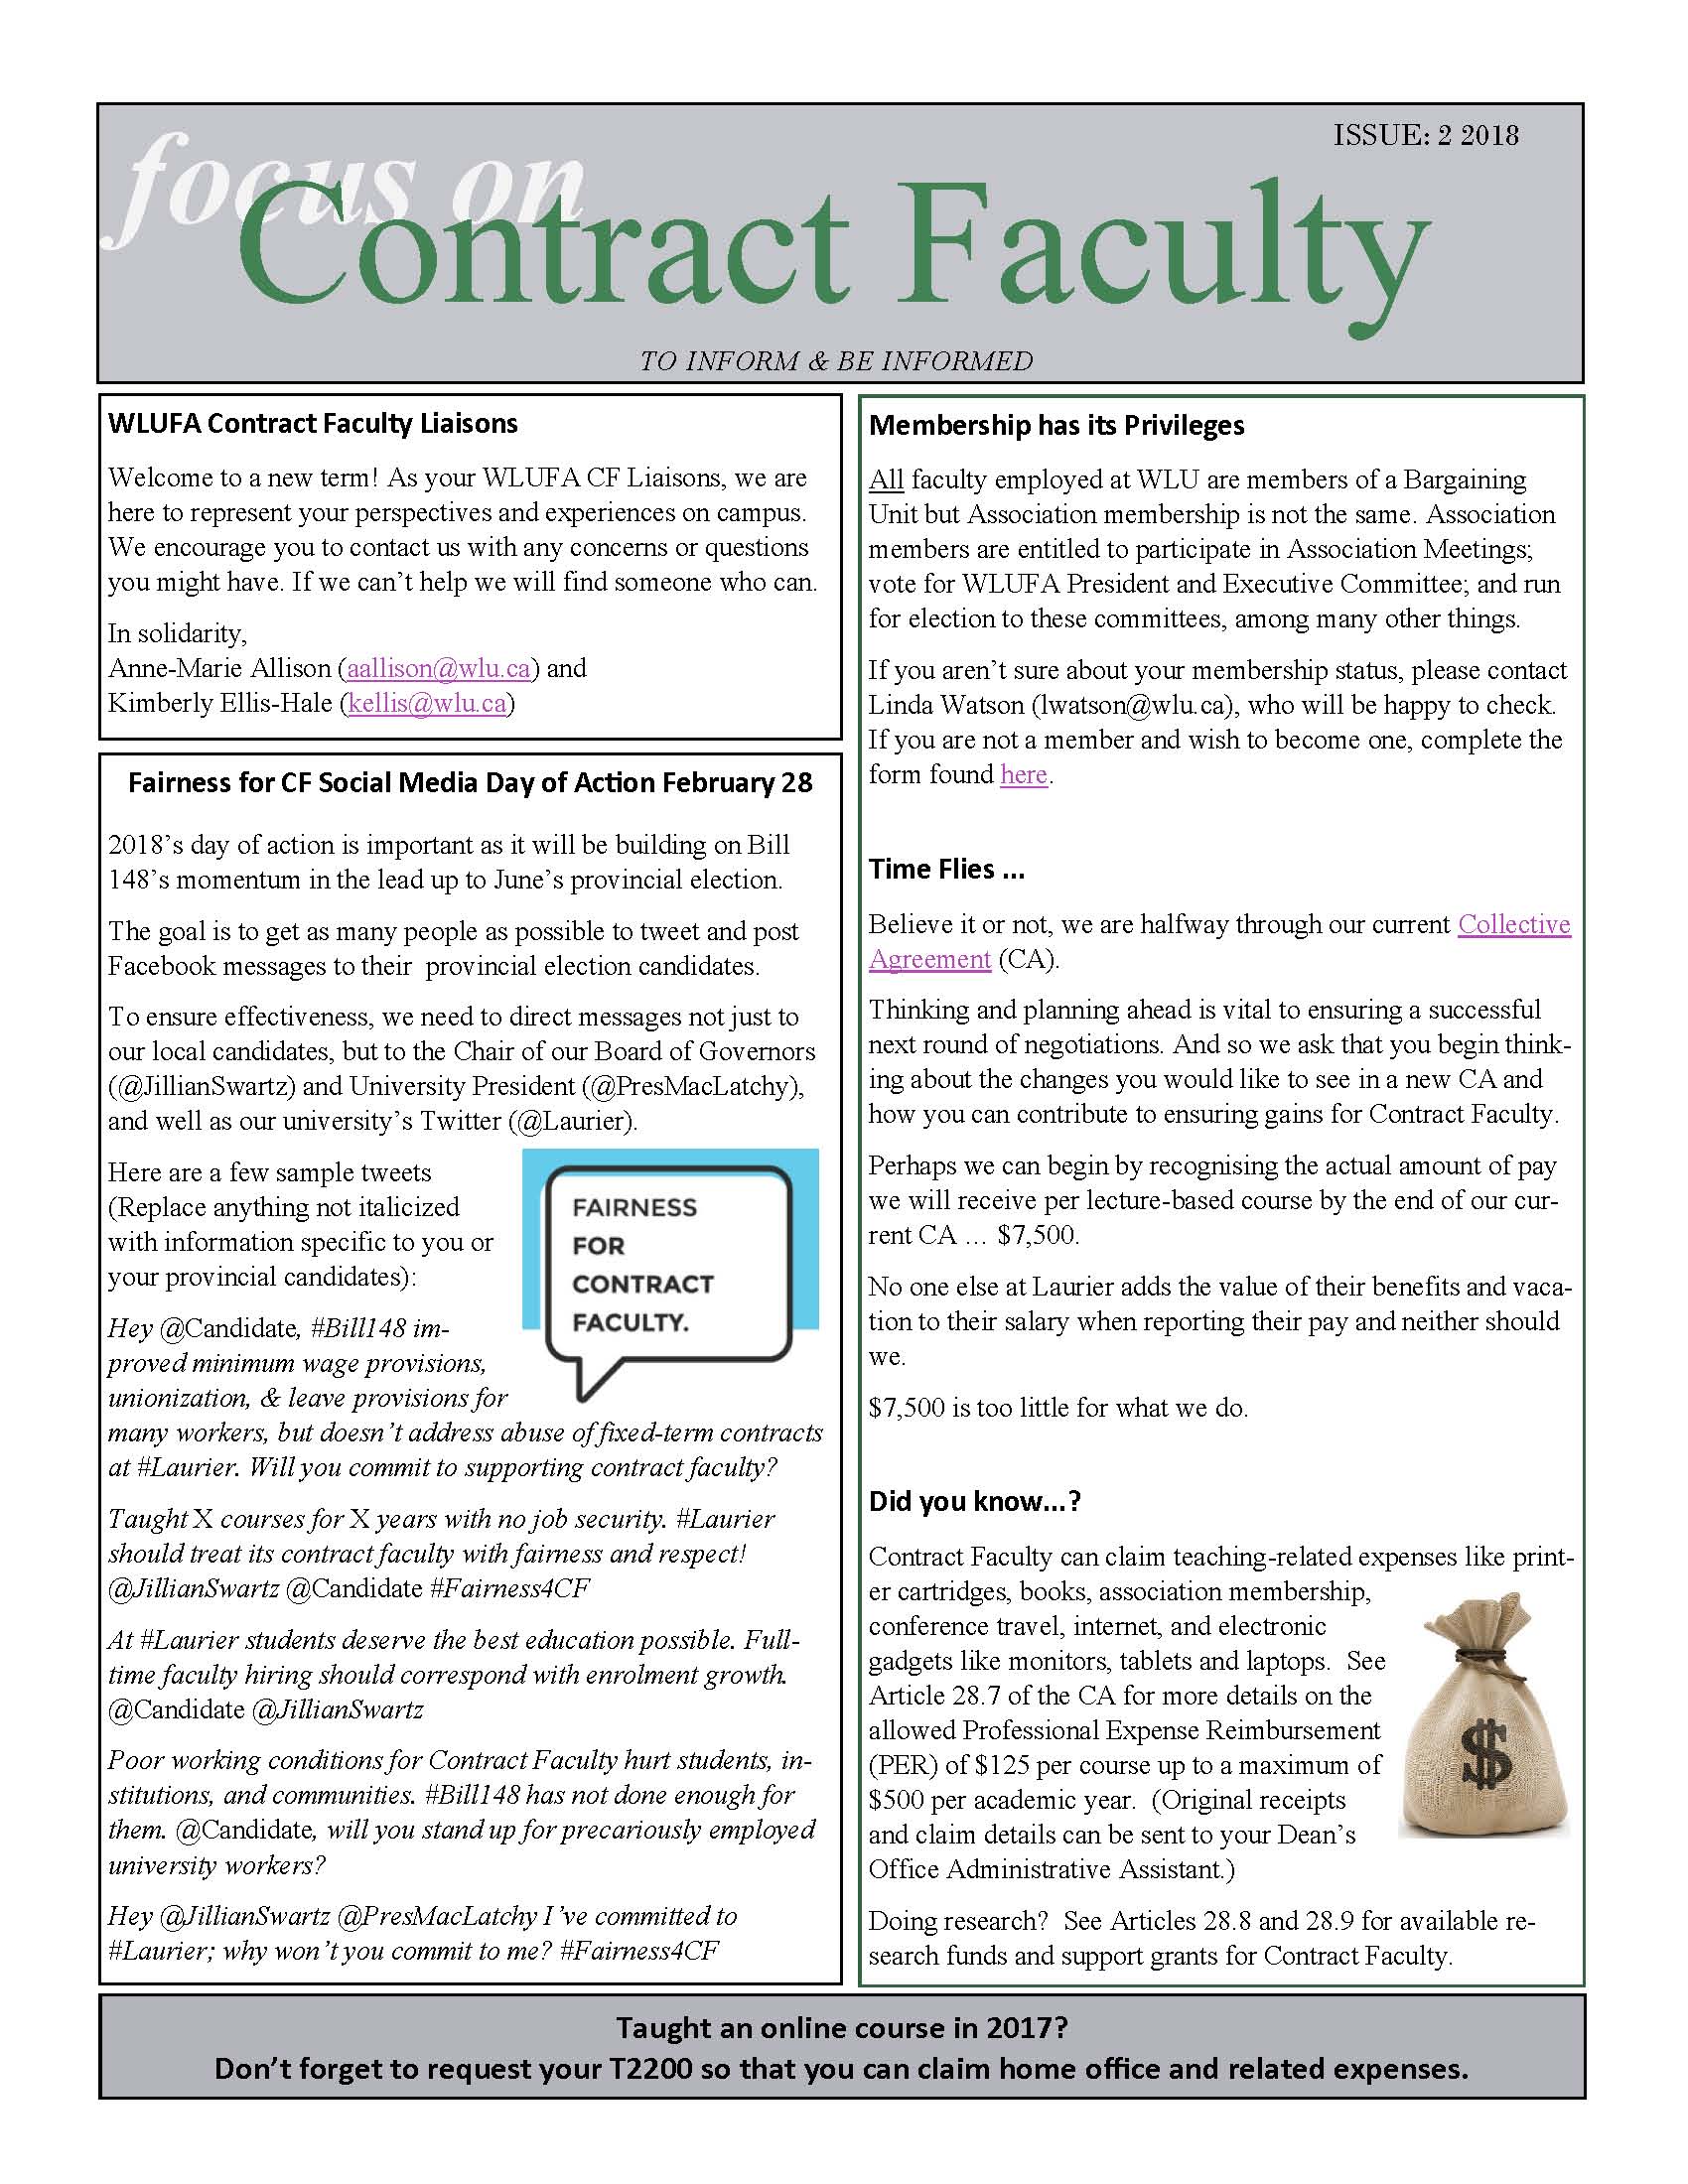 Focus on Contract Faculty